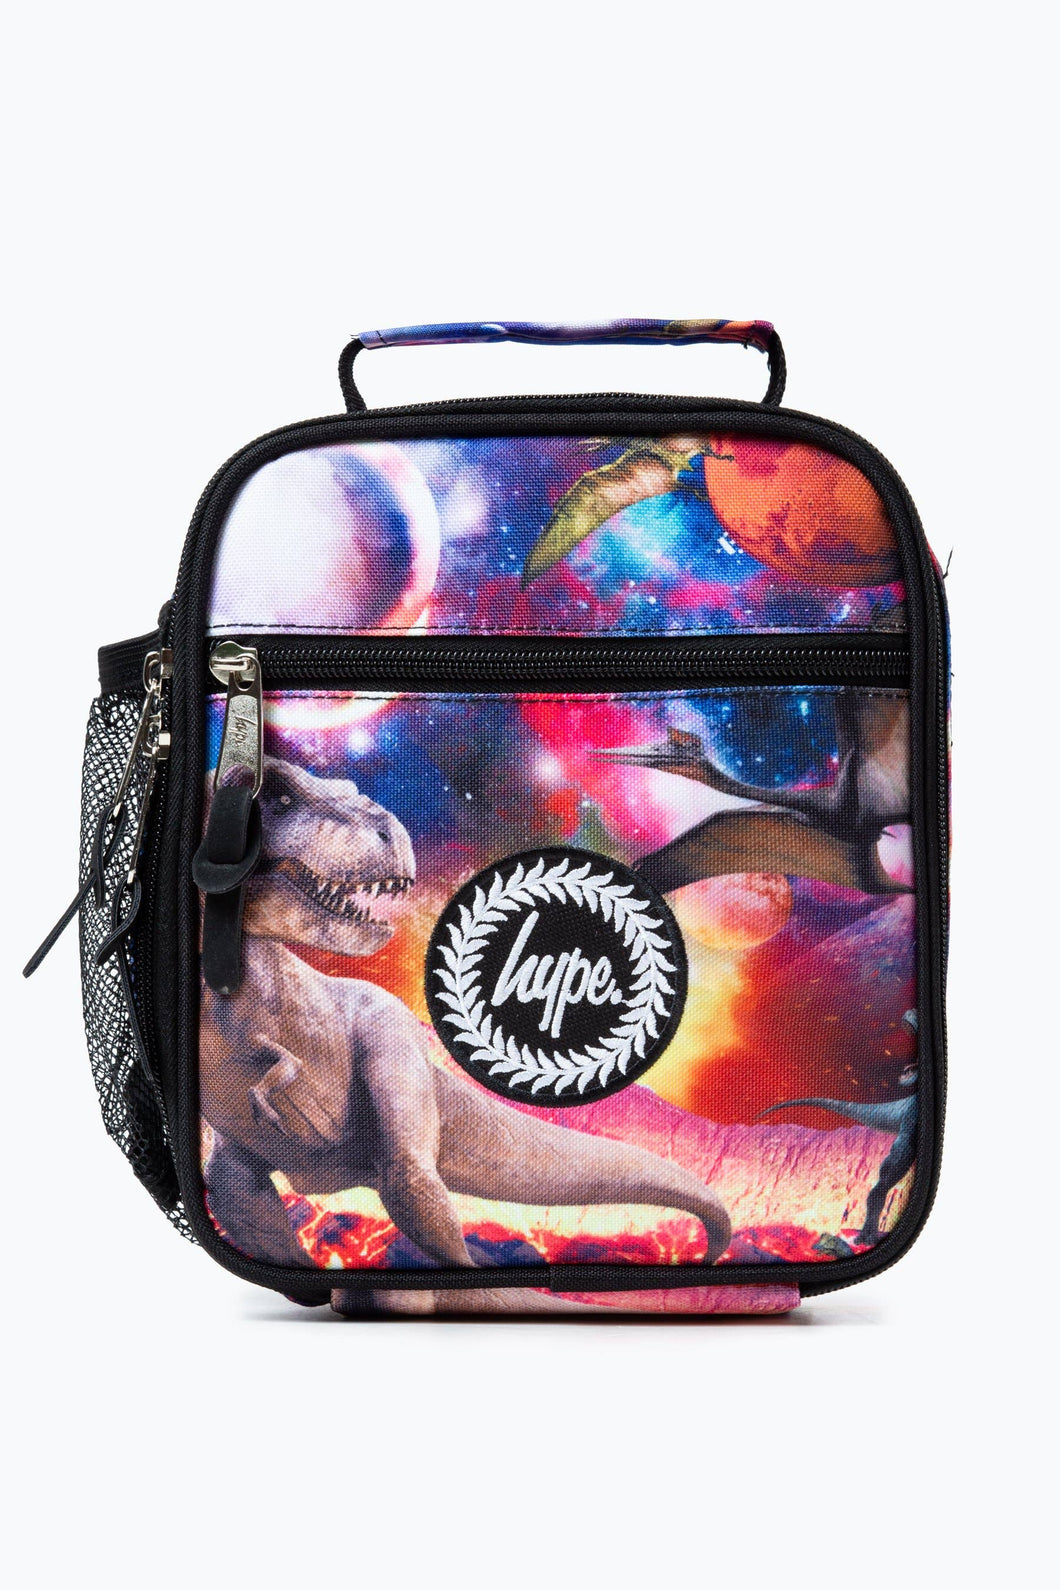 HYPE SPACE DINOSAUR LUNCH BAG – The Market at Think Ability